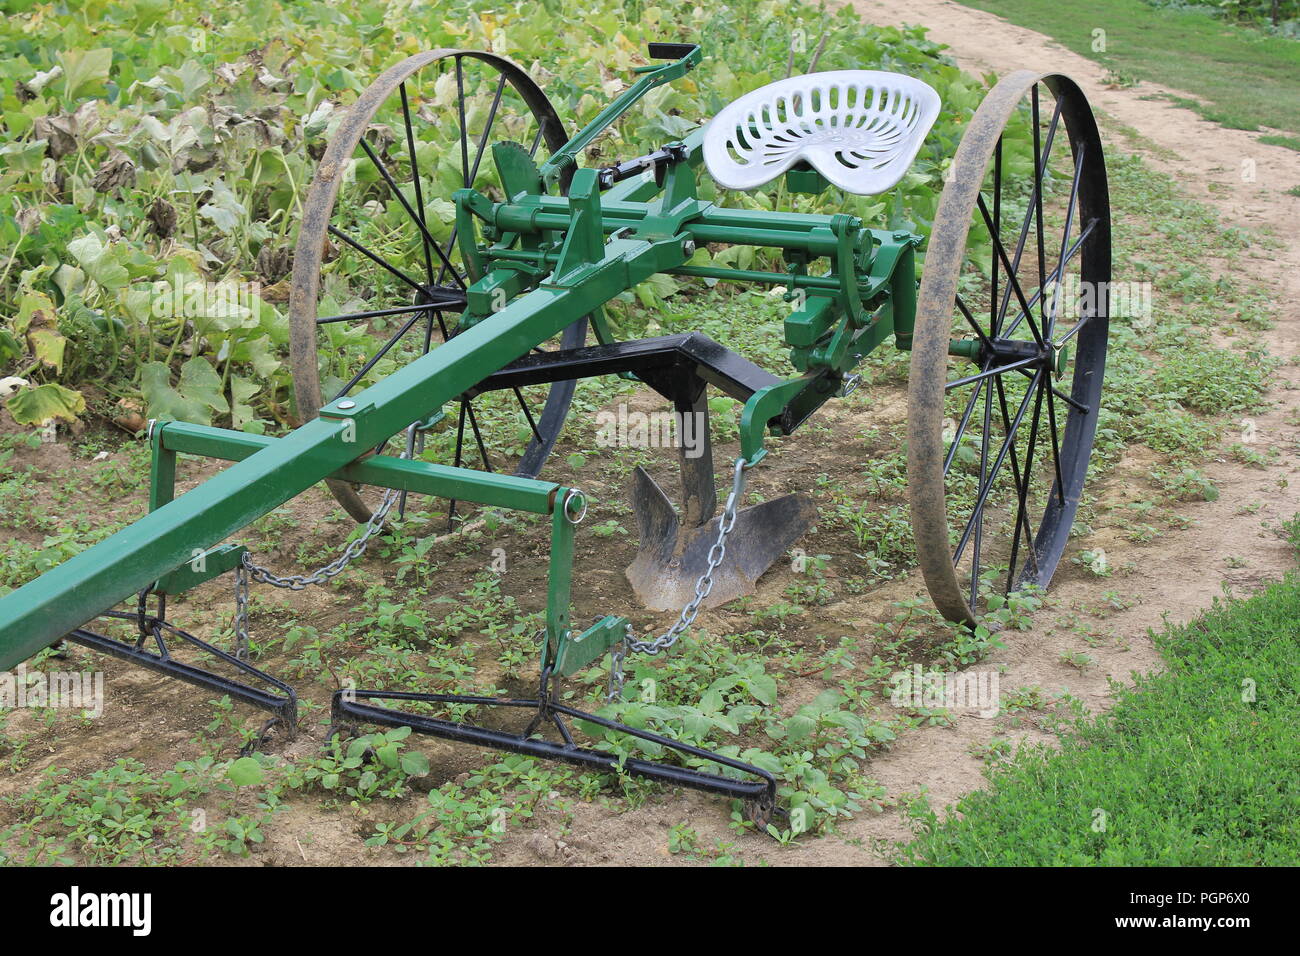 Vintage farm plow on display at the local Community Garden. Stock Photo